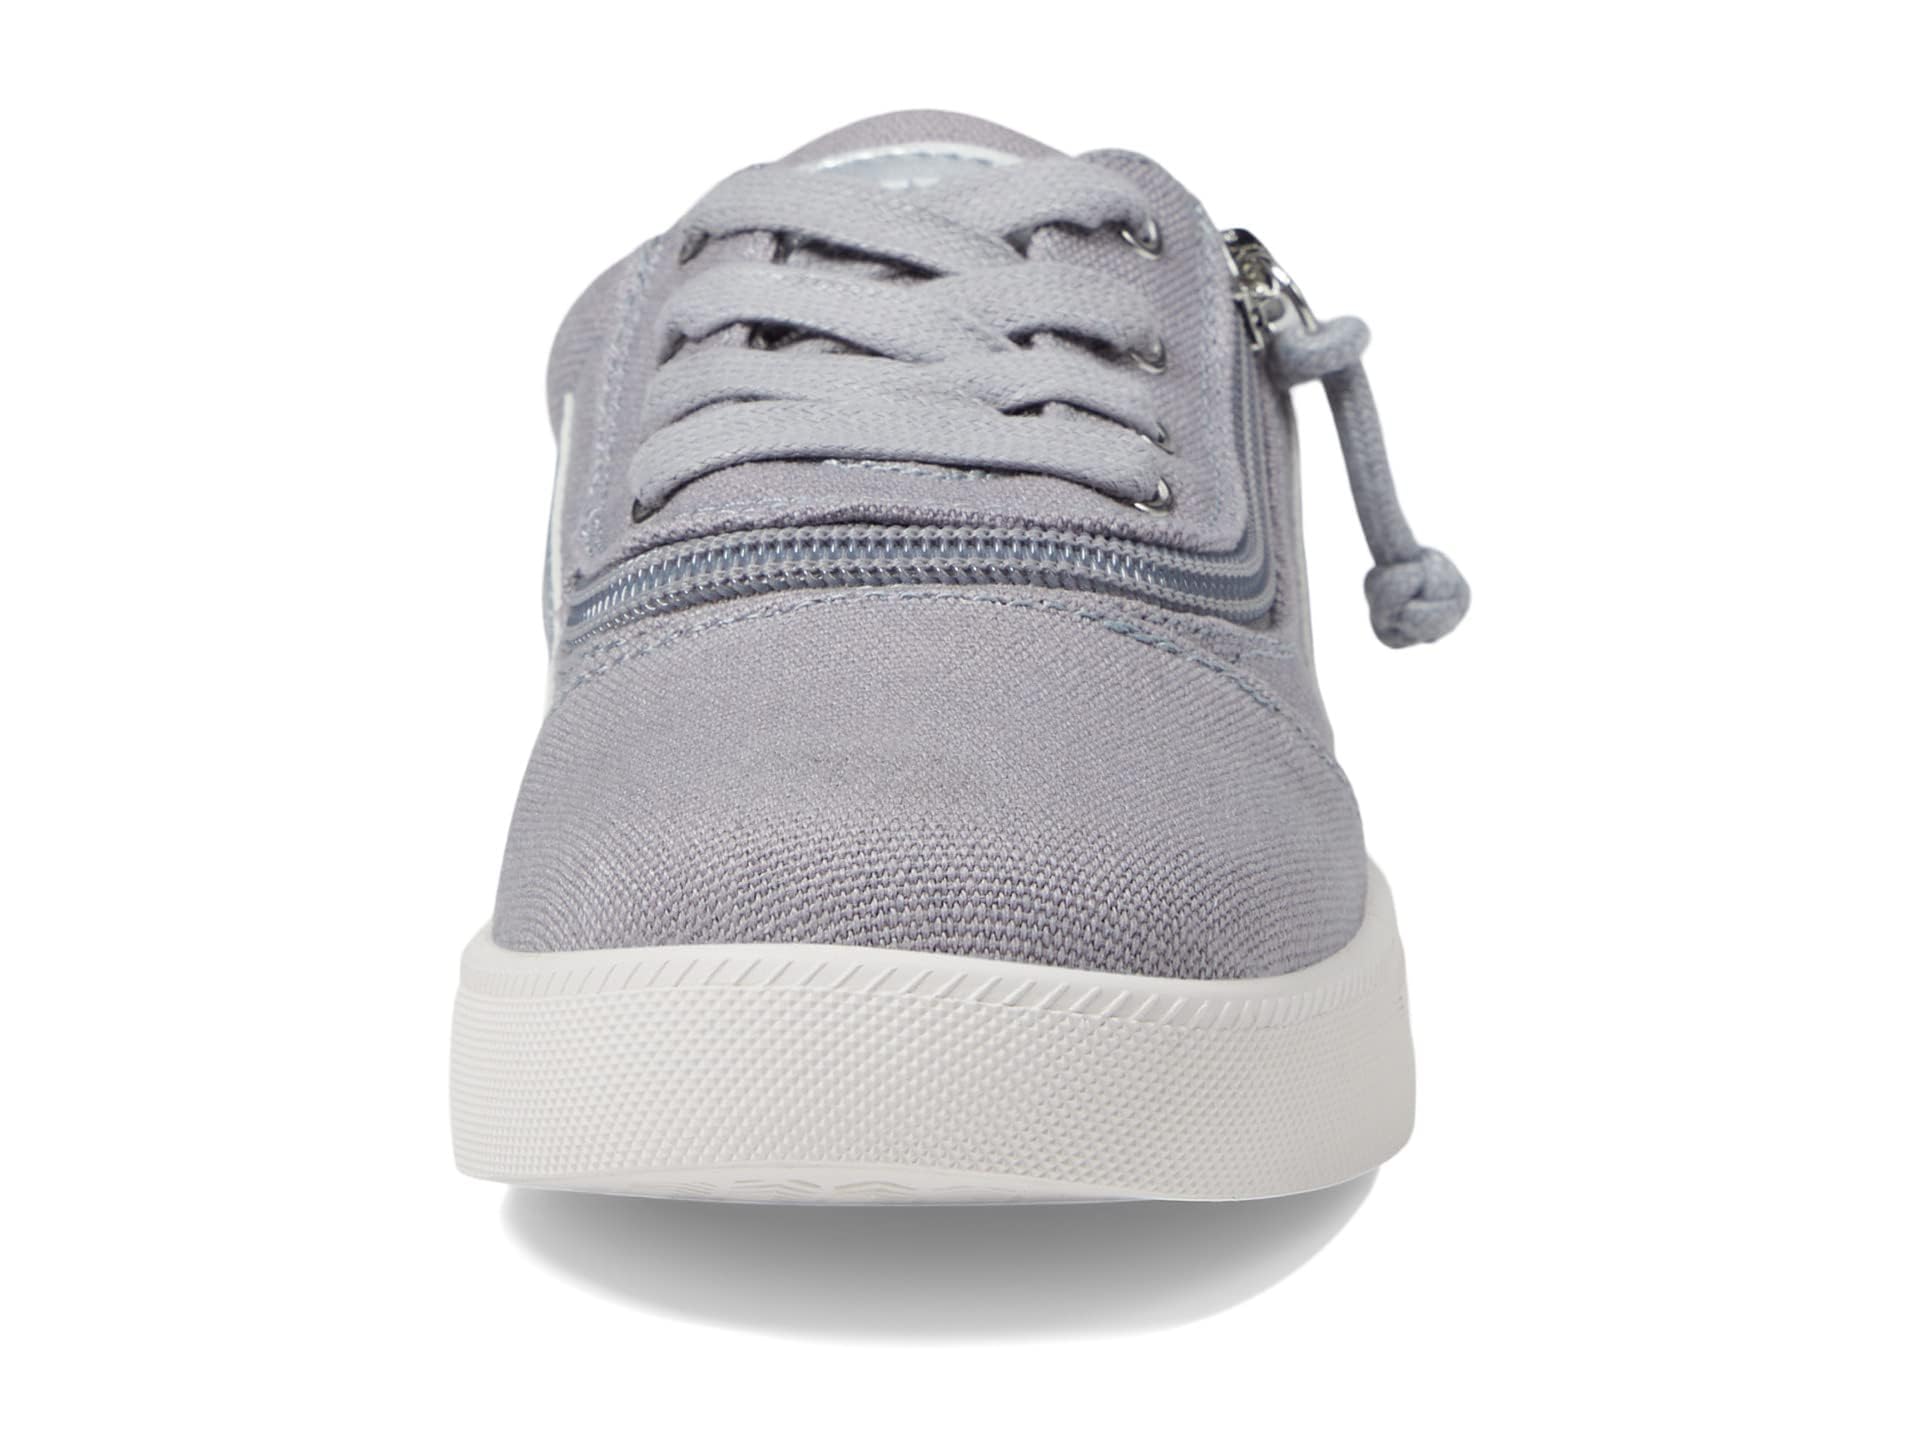 BILLY Footwear Kids CS Low Sneakers for Little and Big Kid - Canvas Upper, Lightweight Canvas Lining, and Rubber Outsole